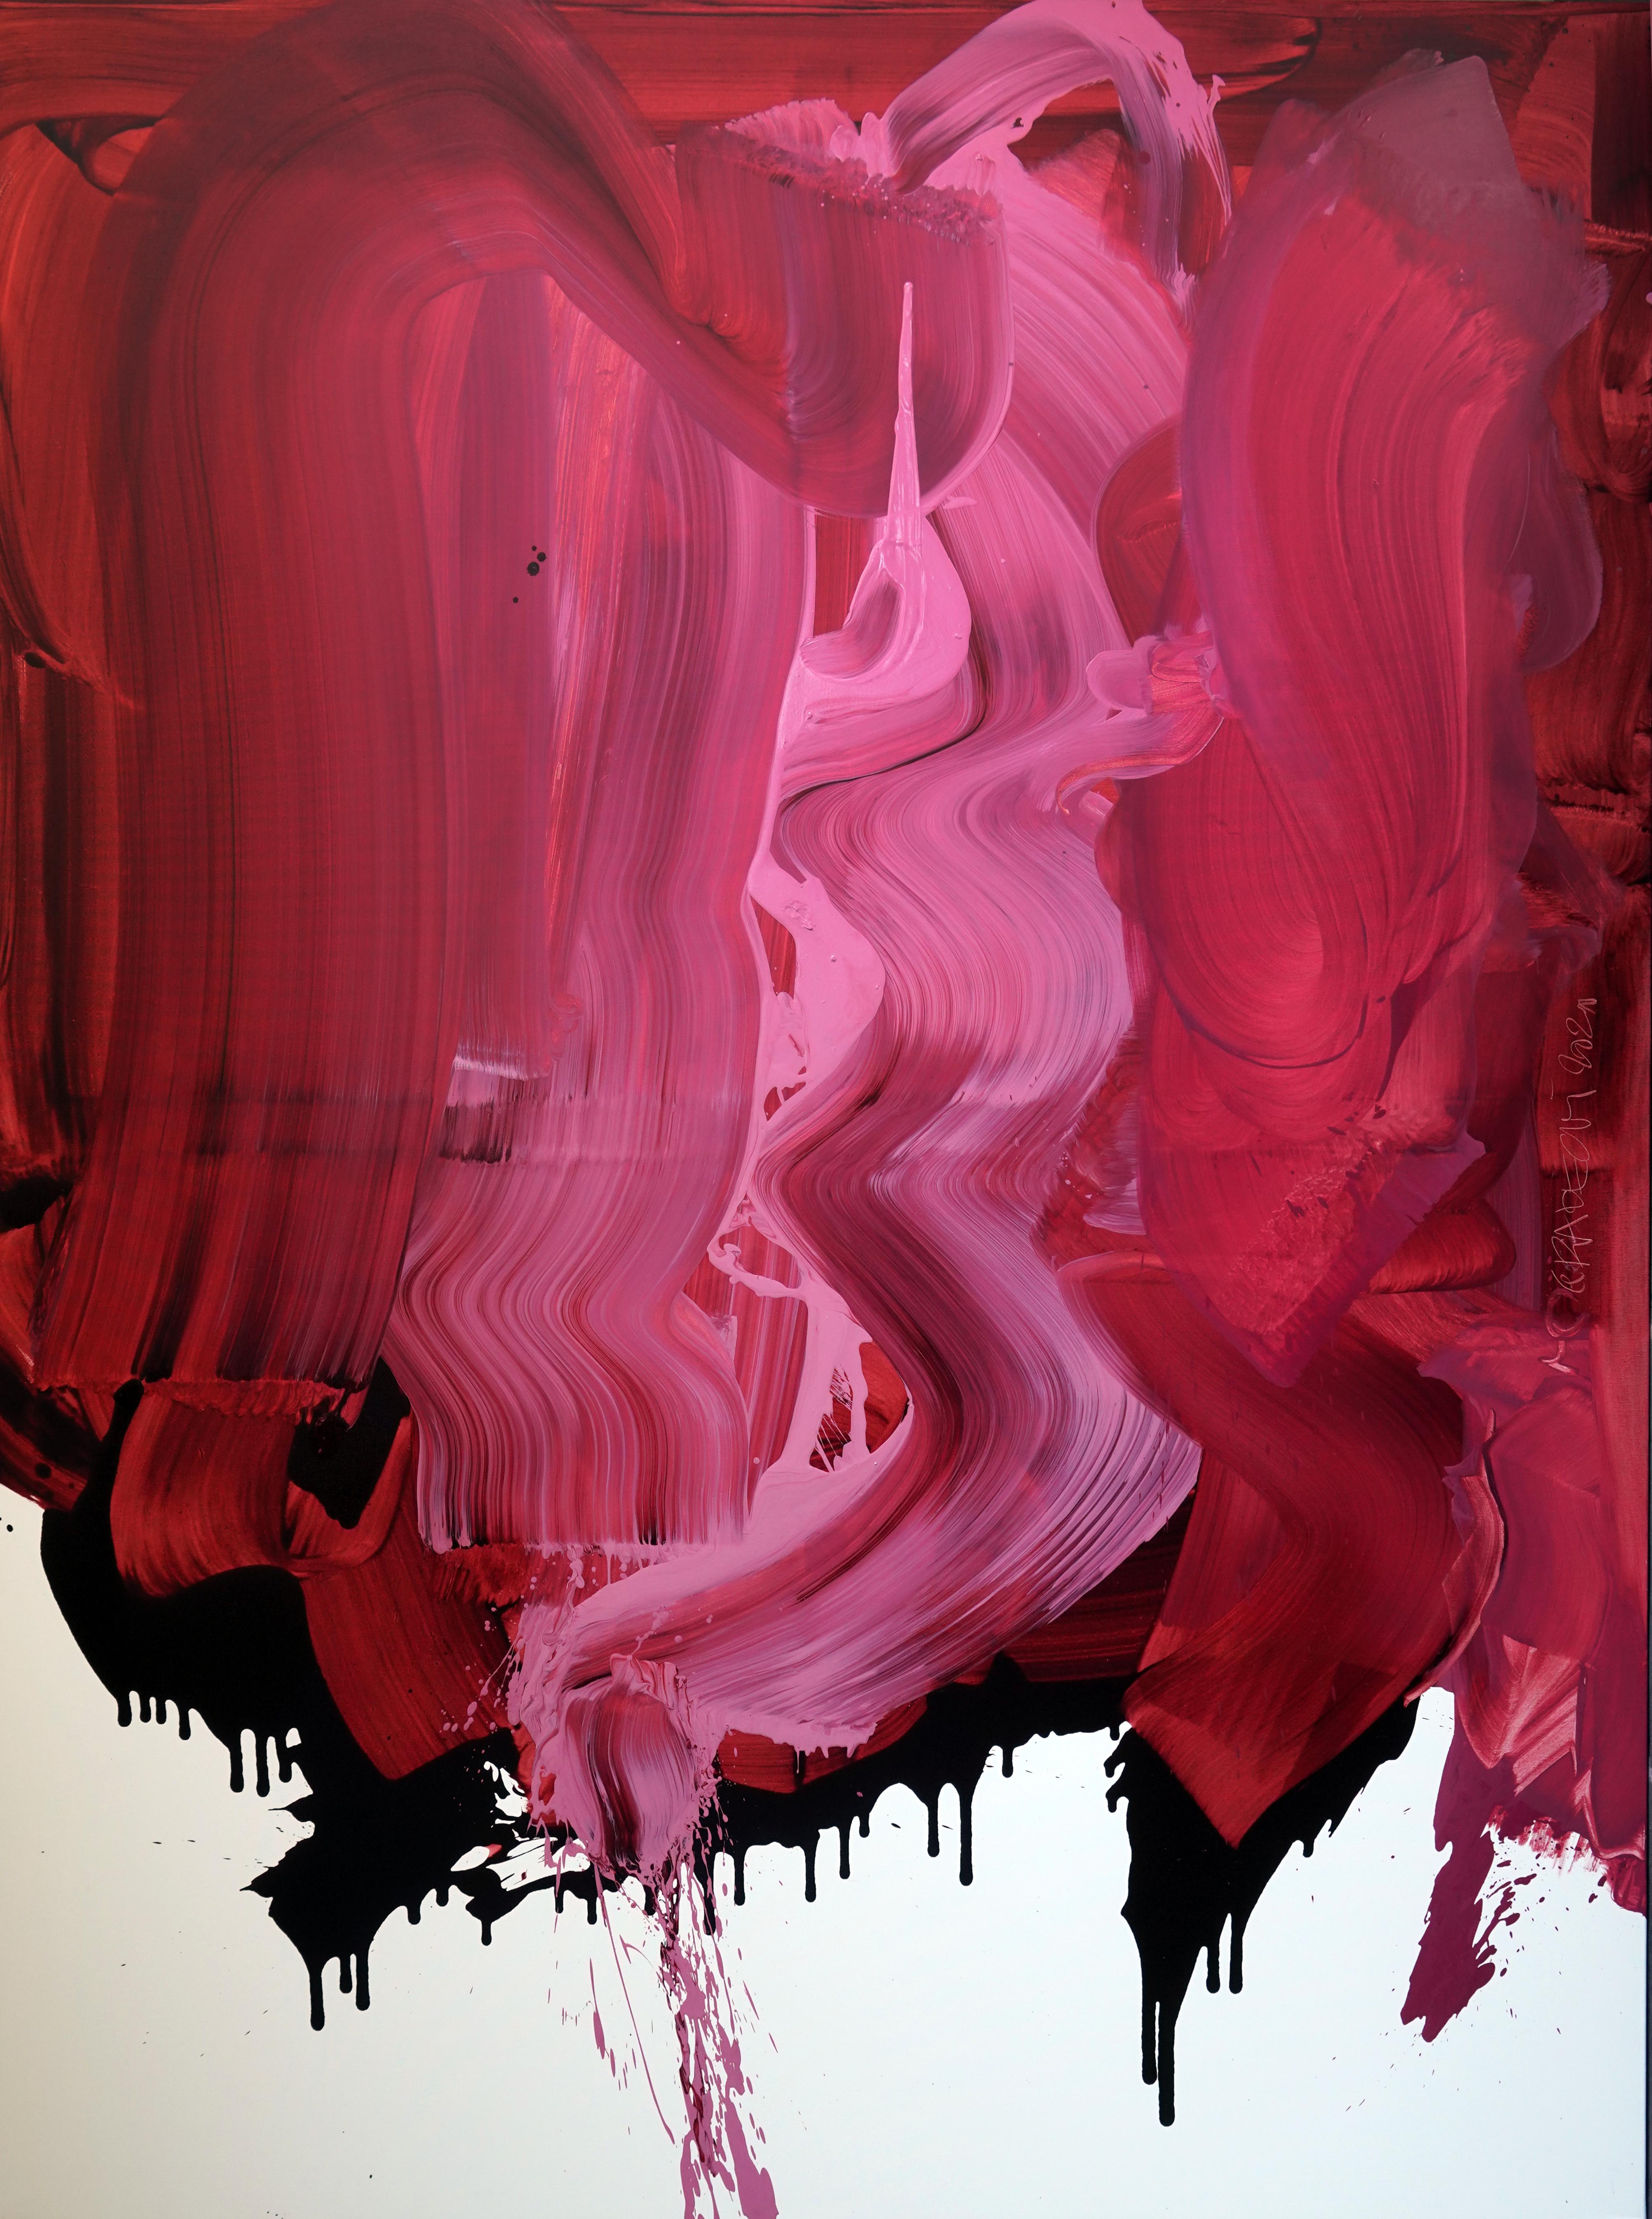 Pink  - Series Blobs - Colourful Expression, XXXL Format Oil Painting